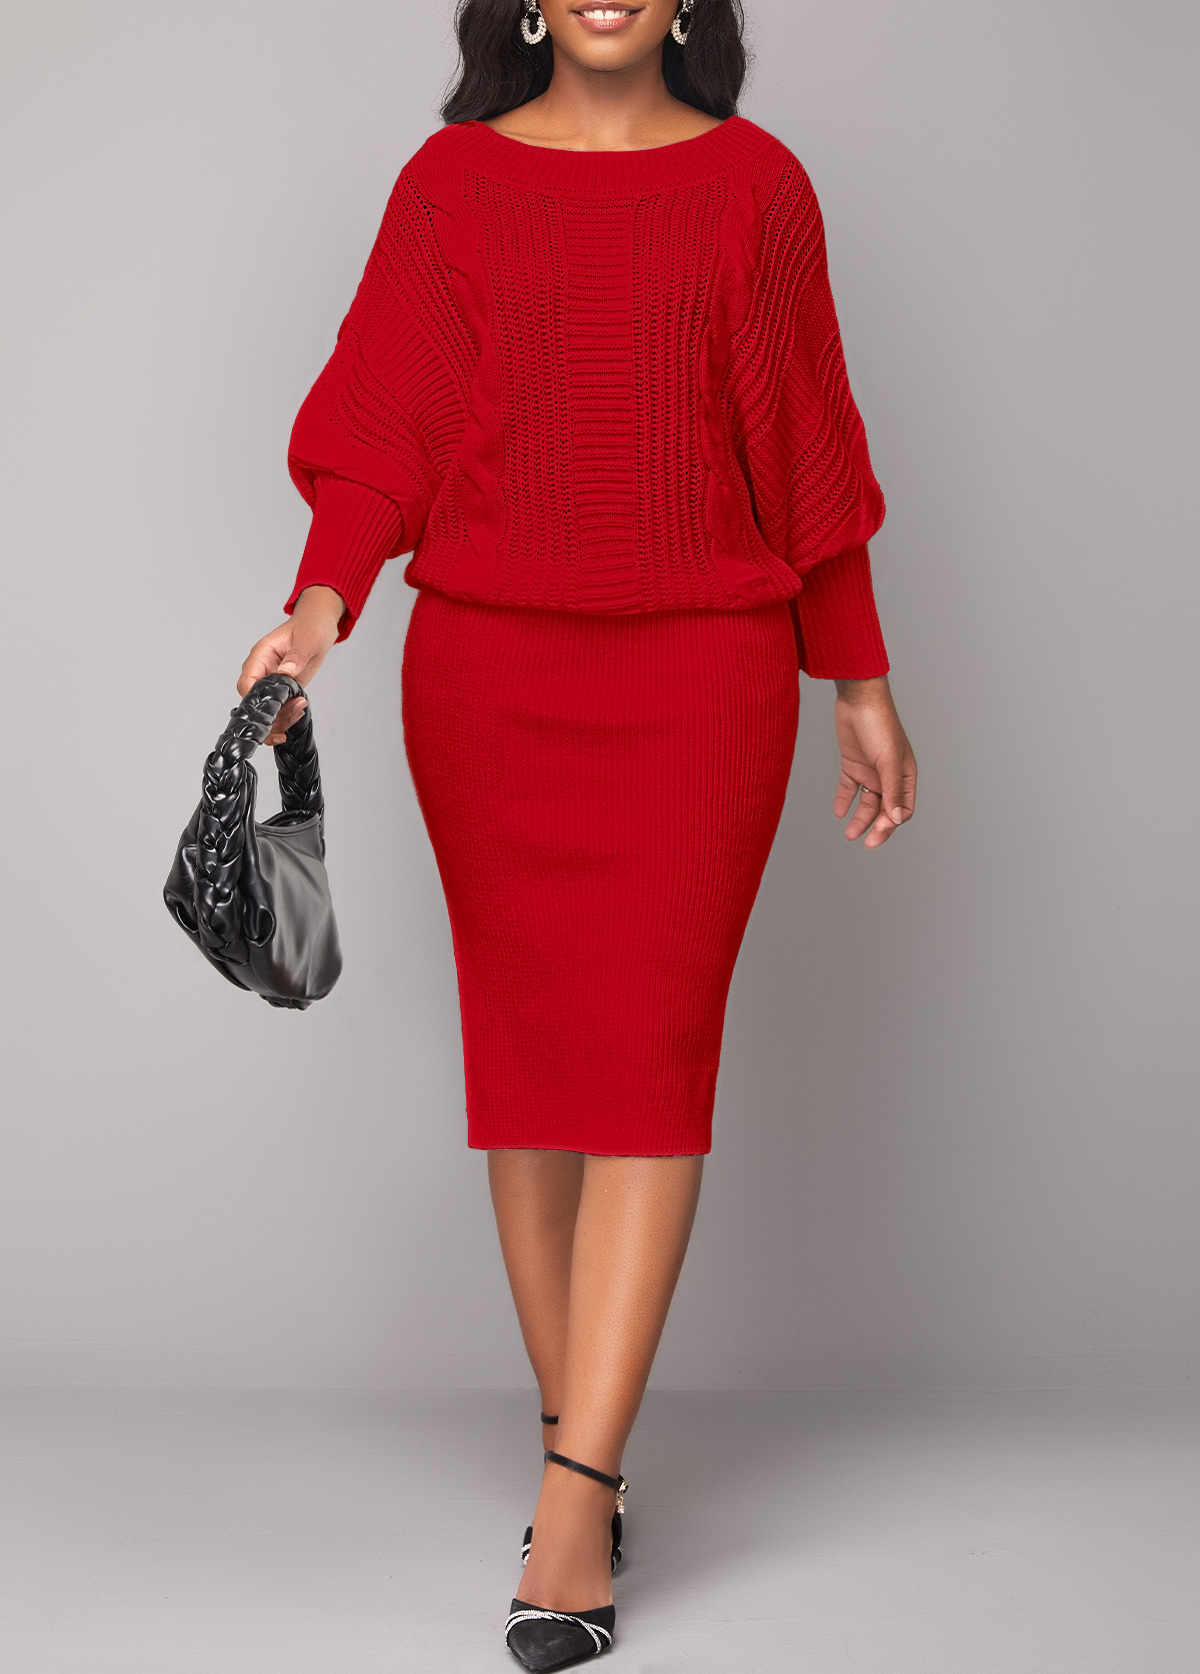 Boat Neck Red Long Sleeve Bodycon Dress